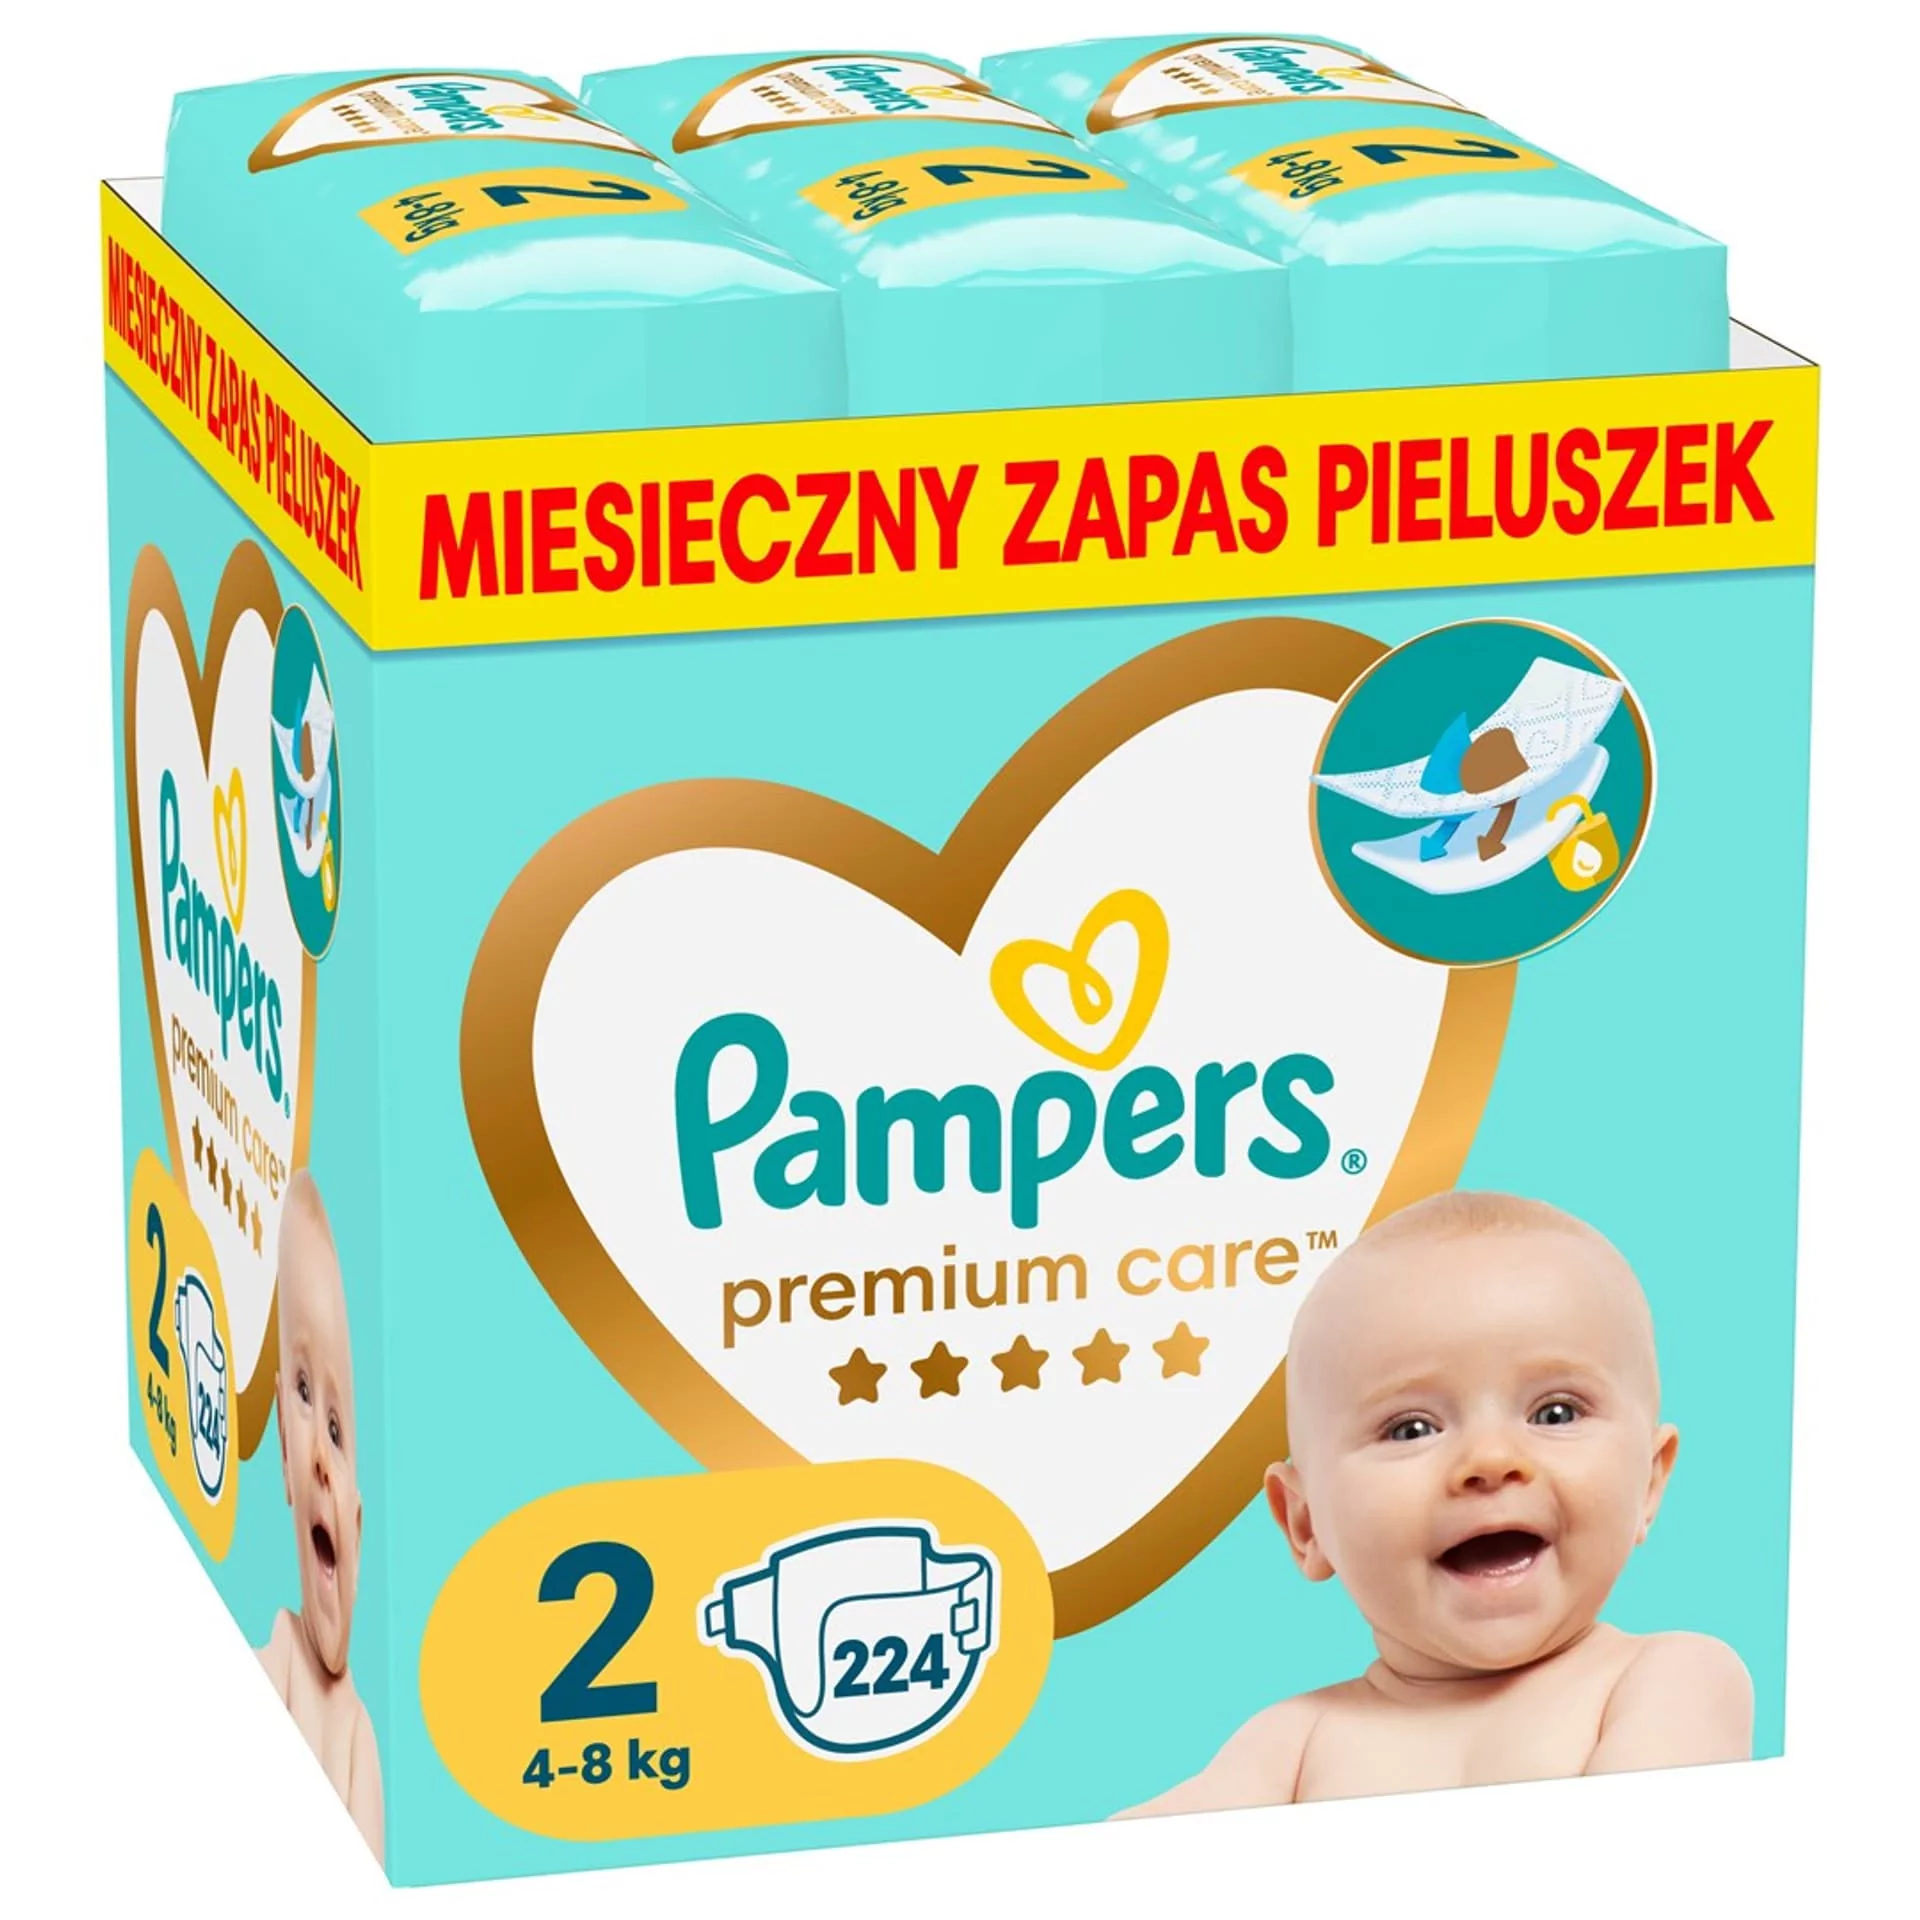 co to jest pampers pants